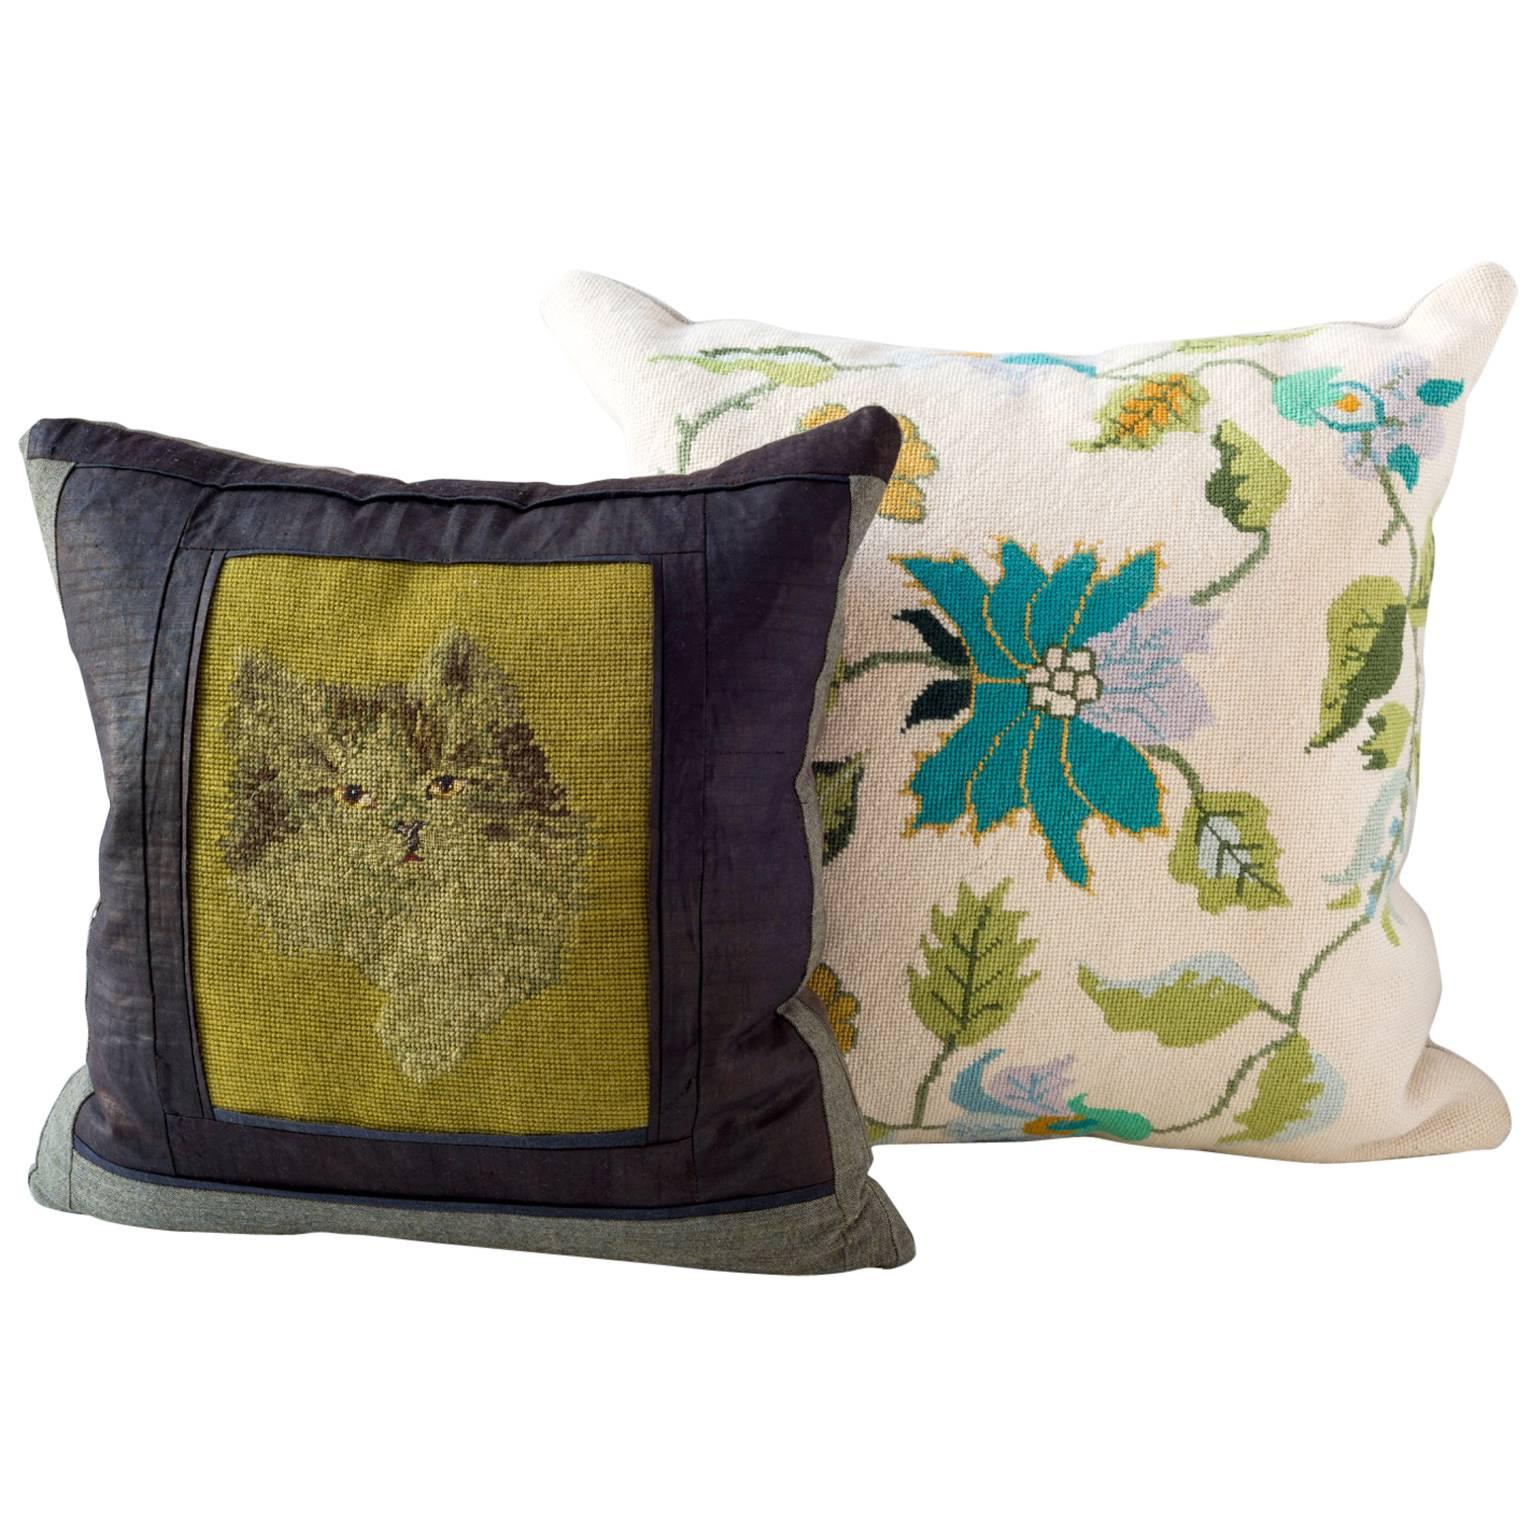 Needlepoint Cushion in Muted Greens For Sale